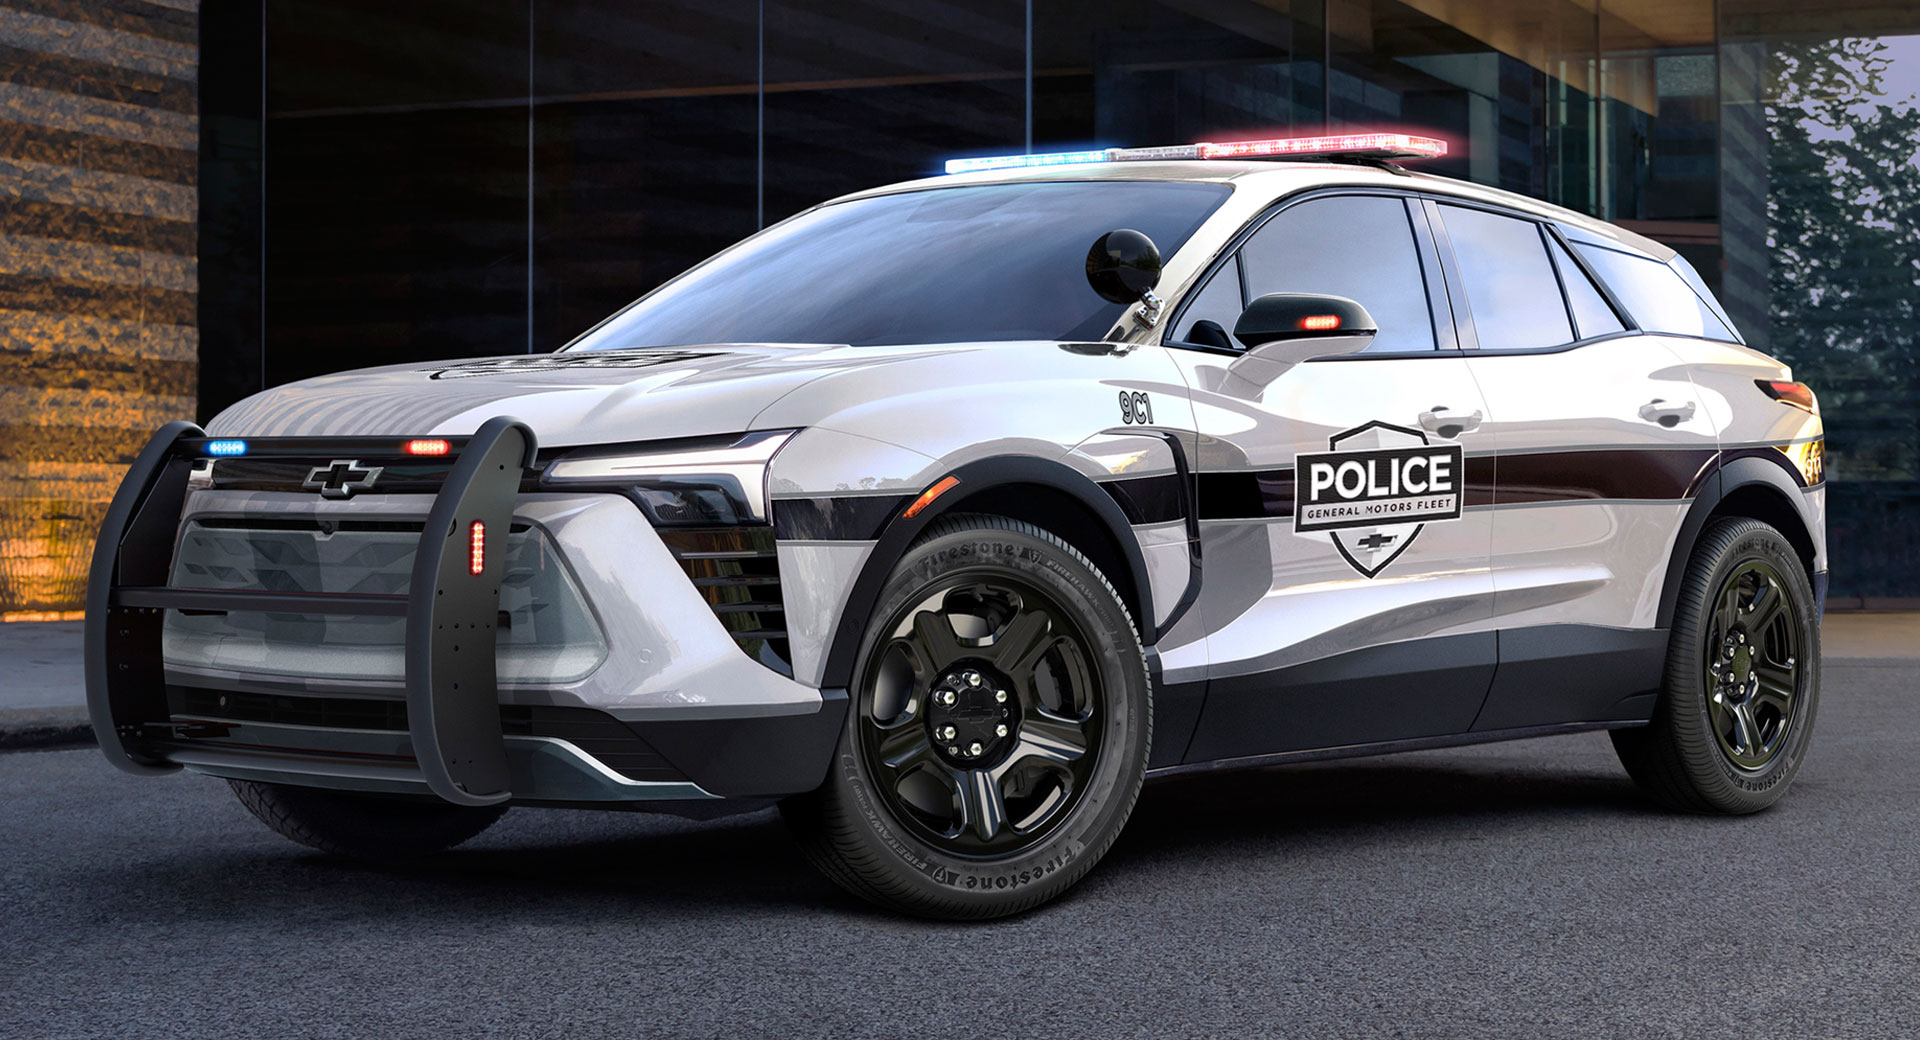 speeders-beware-chevrolet-offering-a-police-pursuit-vehicle-based-on